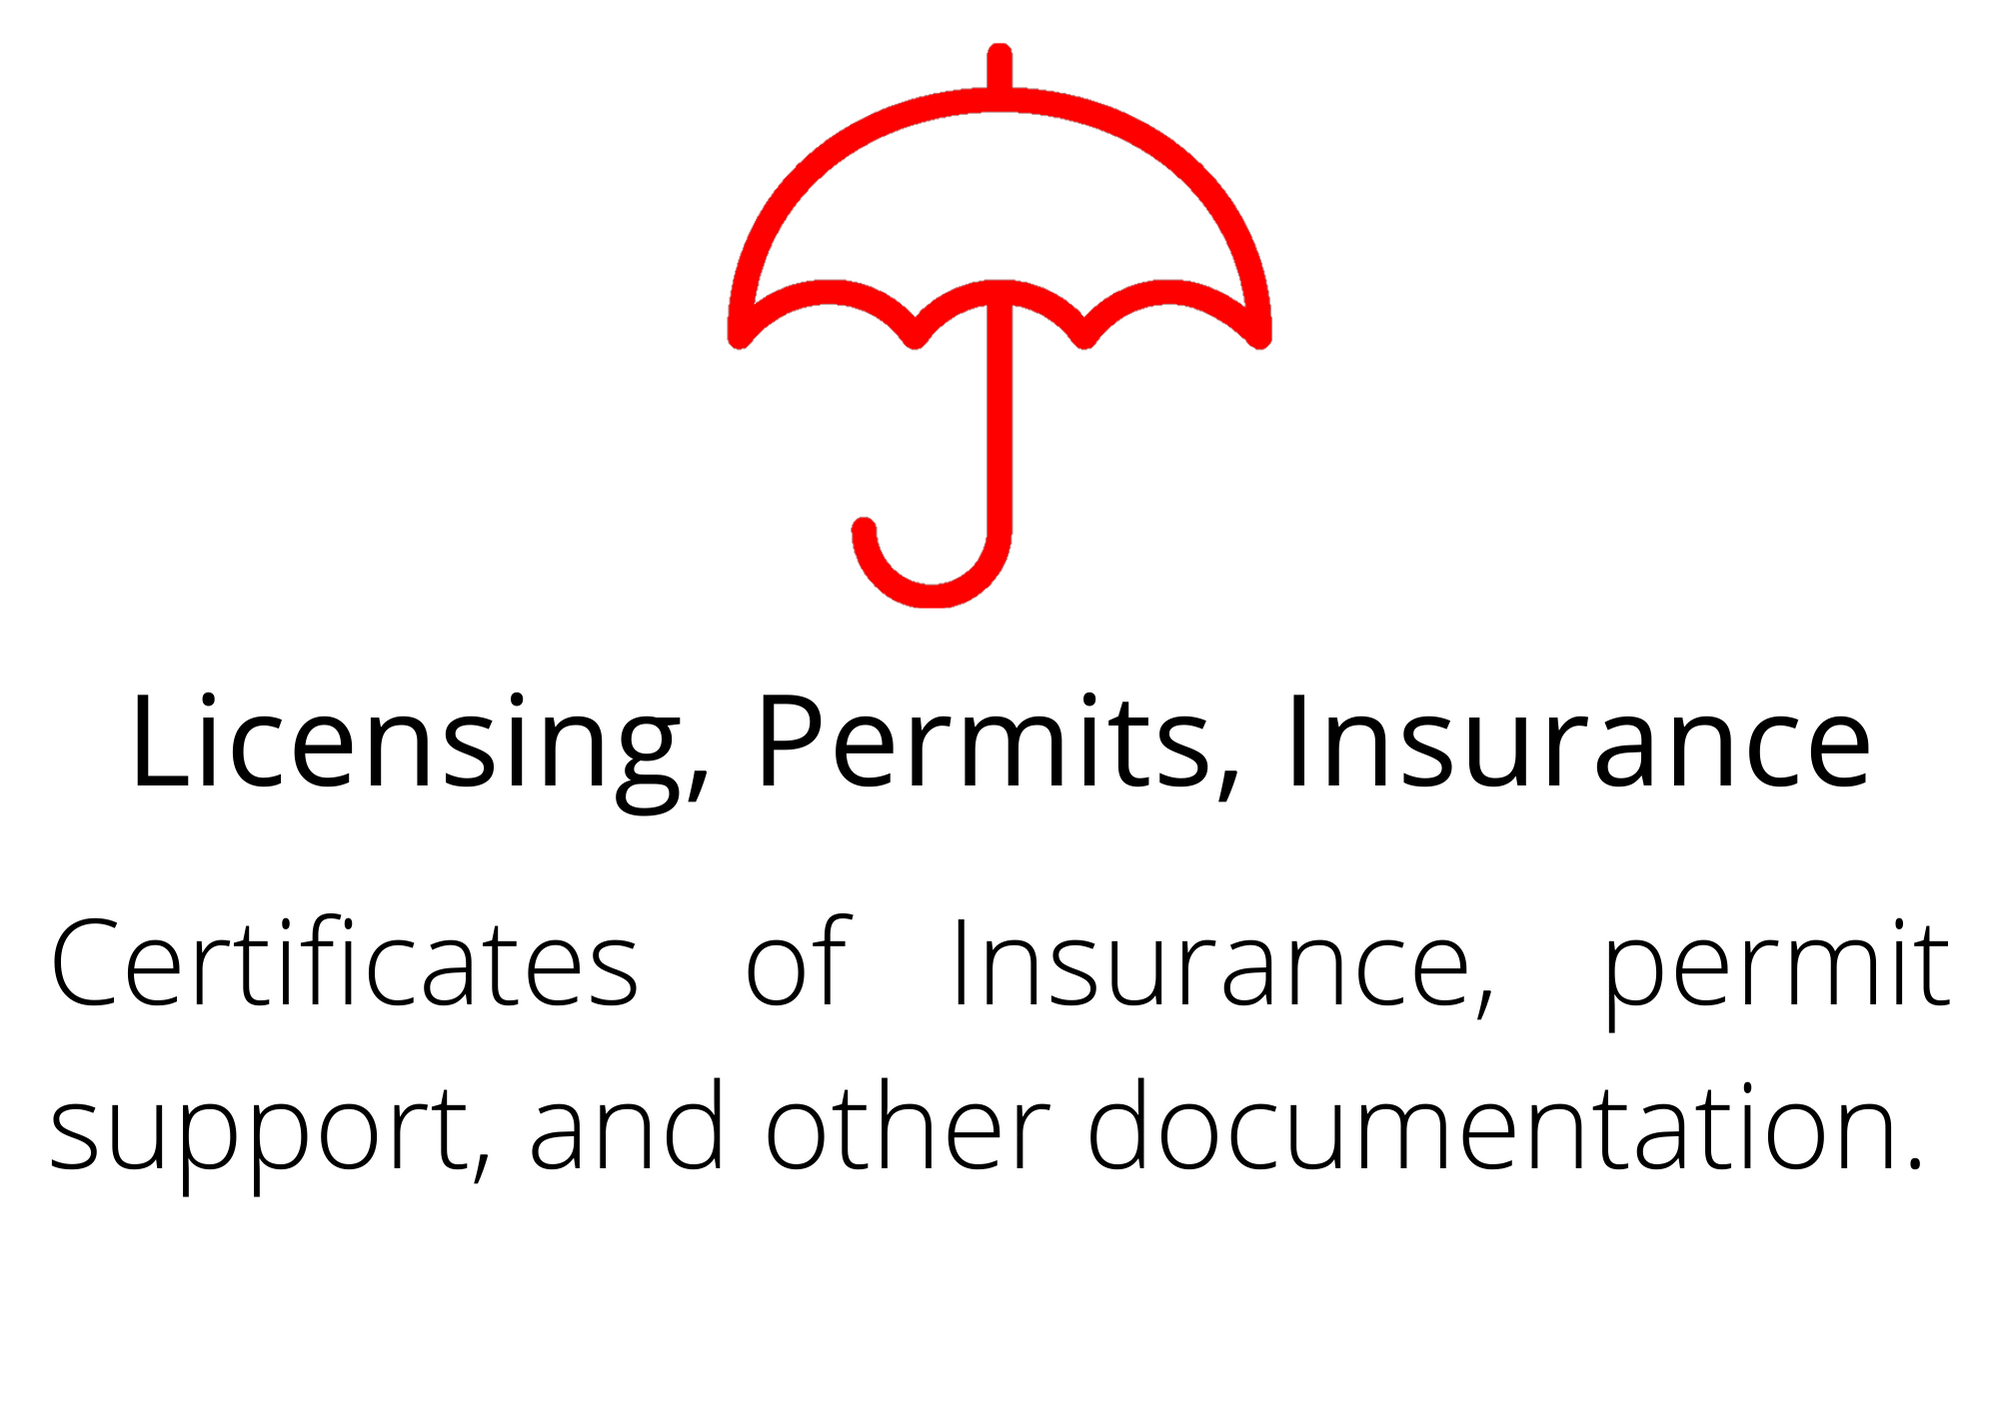 Licensing, Permits, Insurance